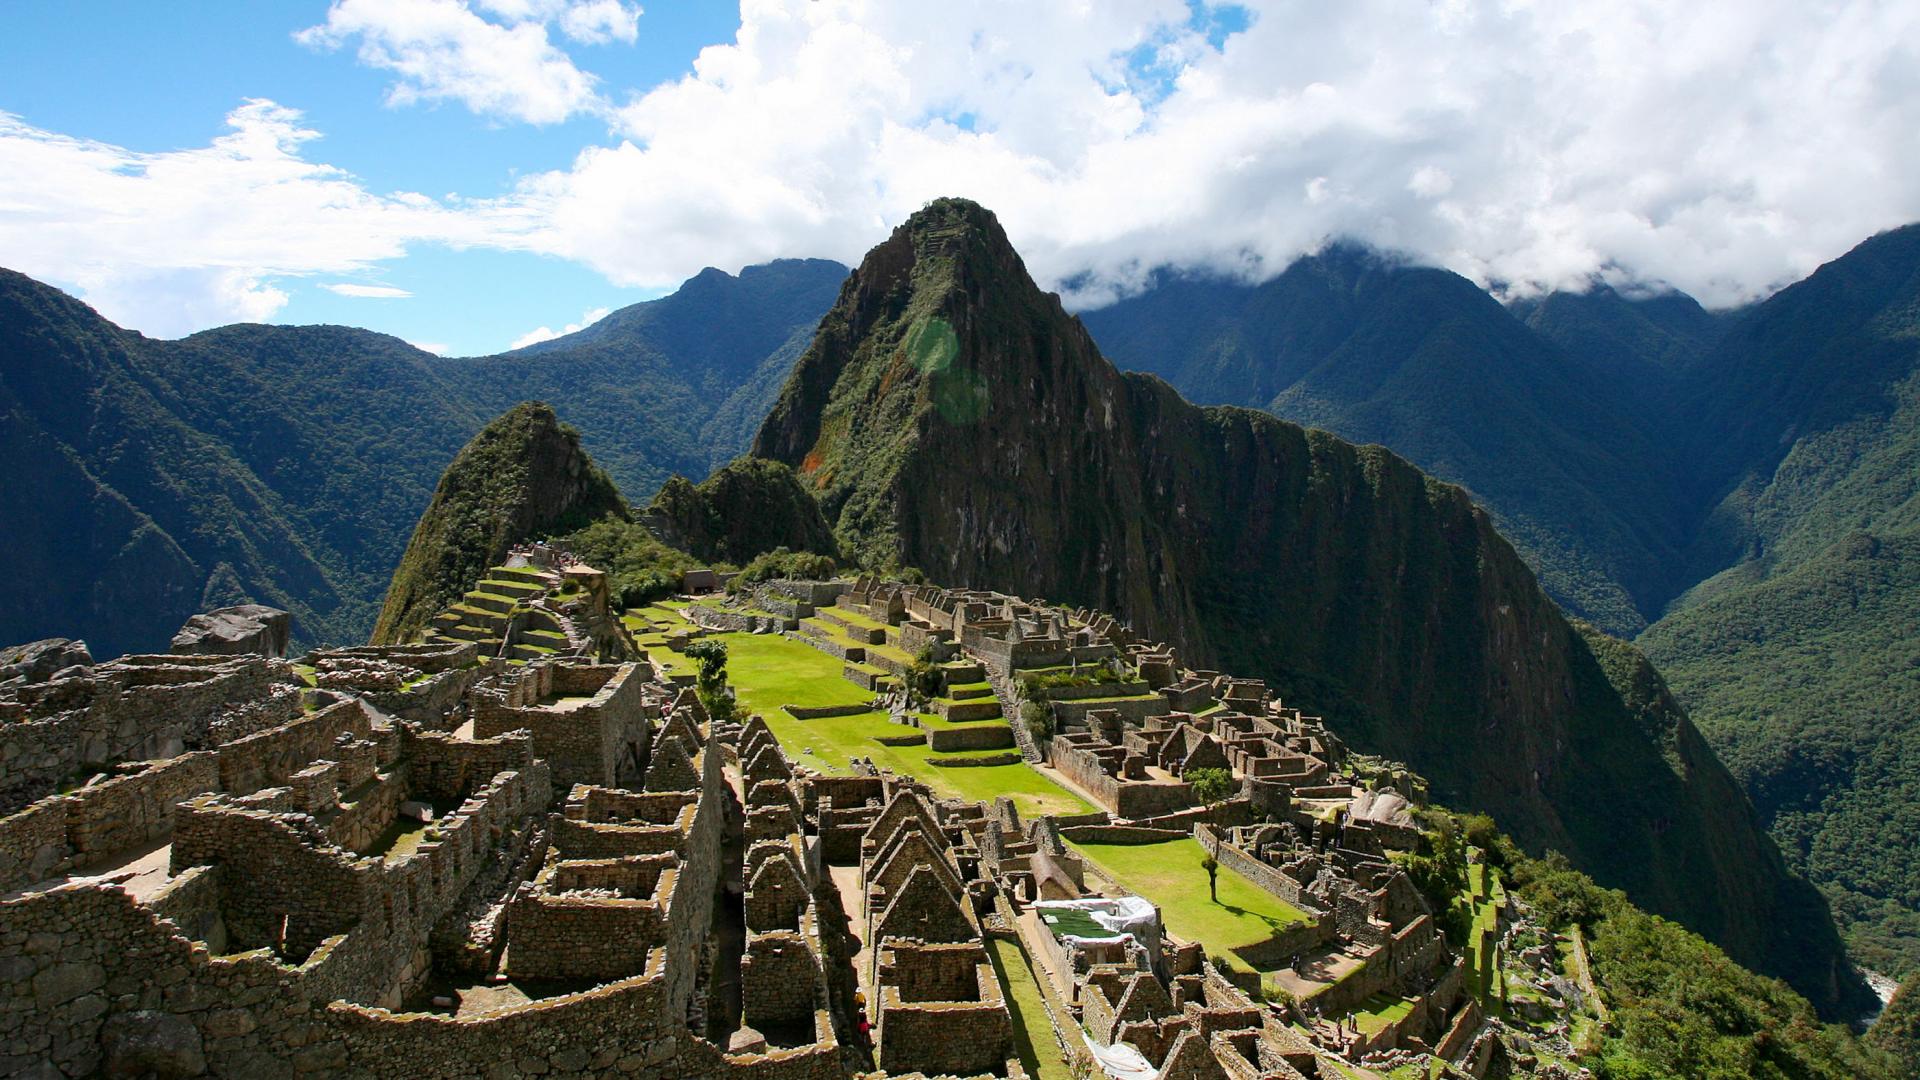 You can visit Machu Picchu, or Cusco, which are not very far from the campsite. Have a nice trip!